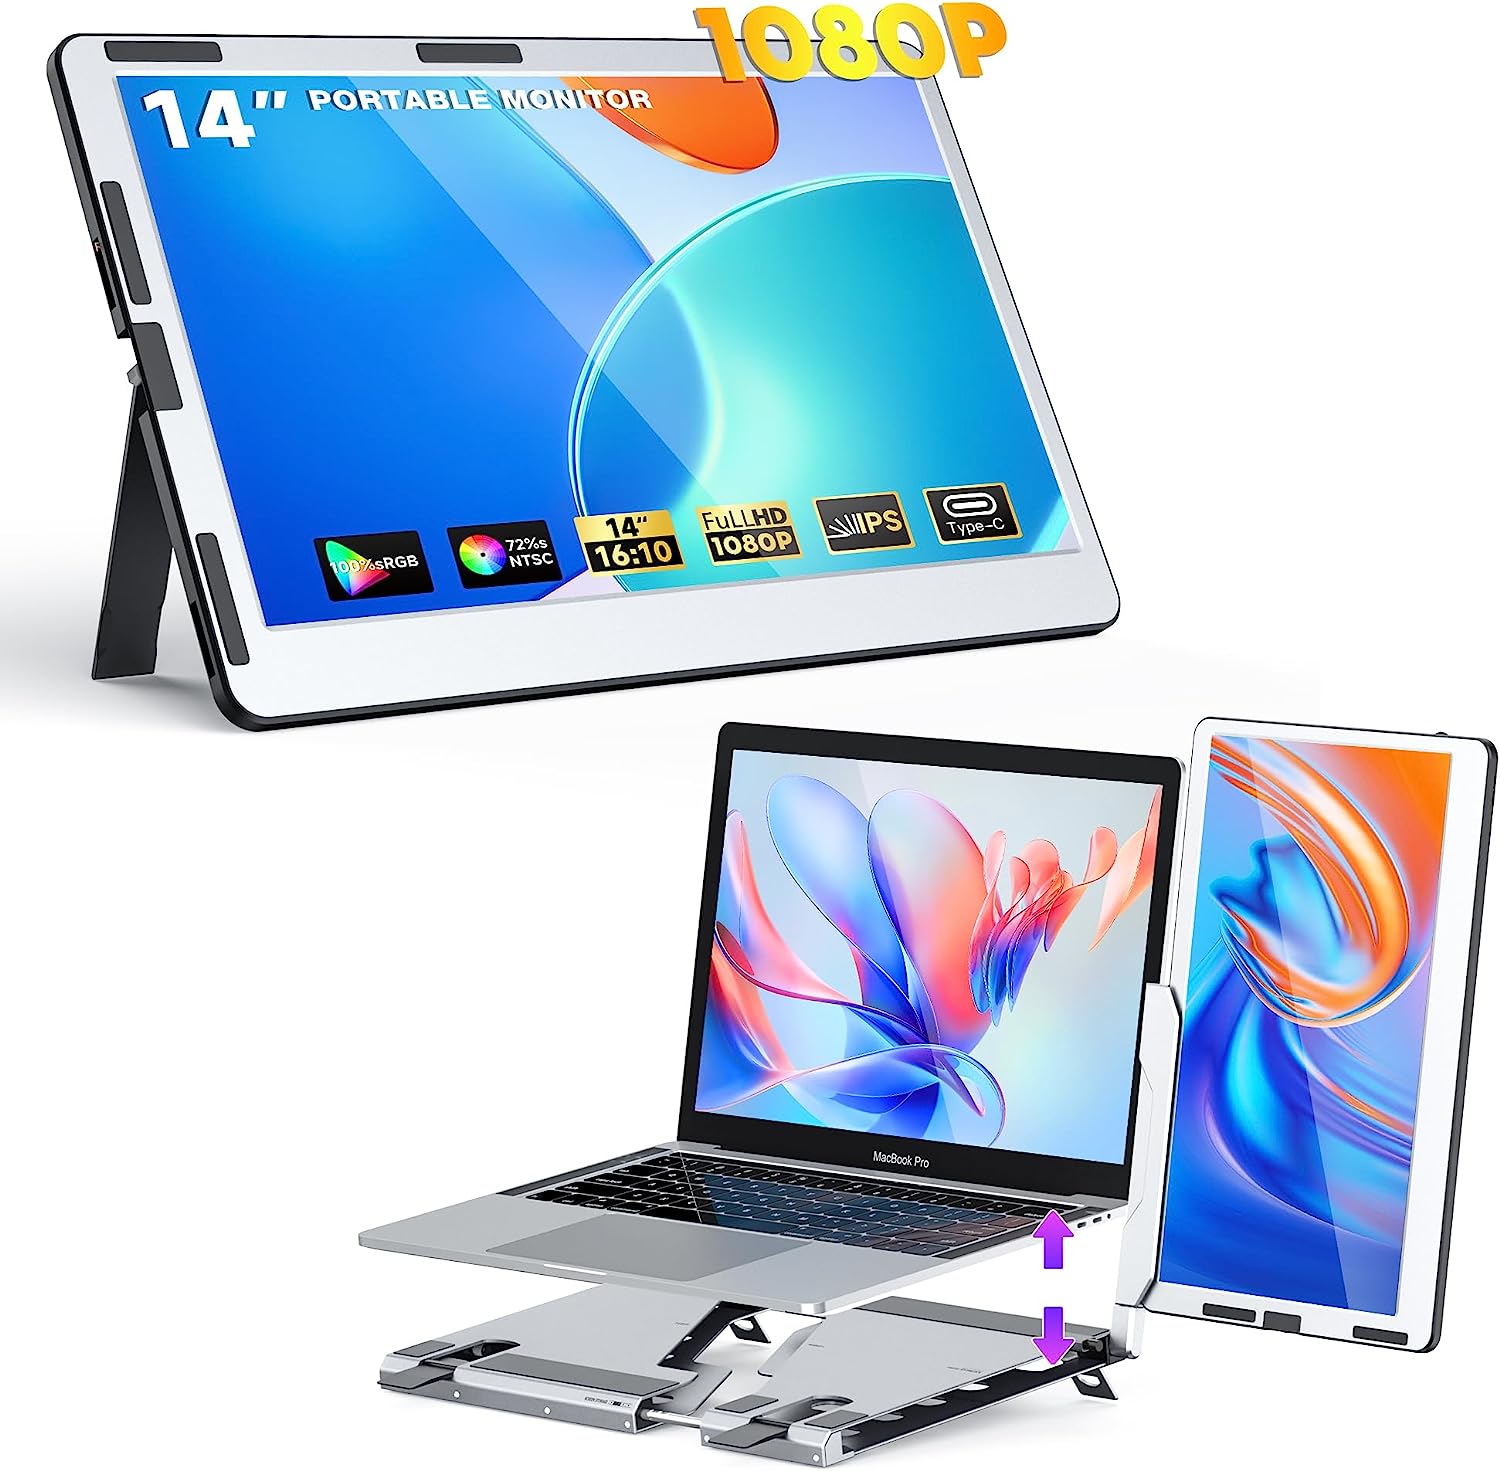 Slide Dual Portable Monitor for Laptop 11.6 FHD 1080P IPS Double